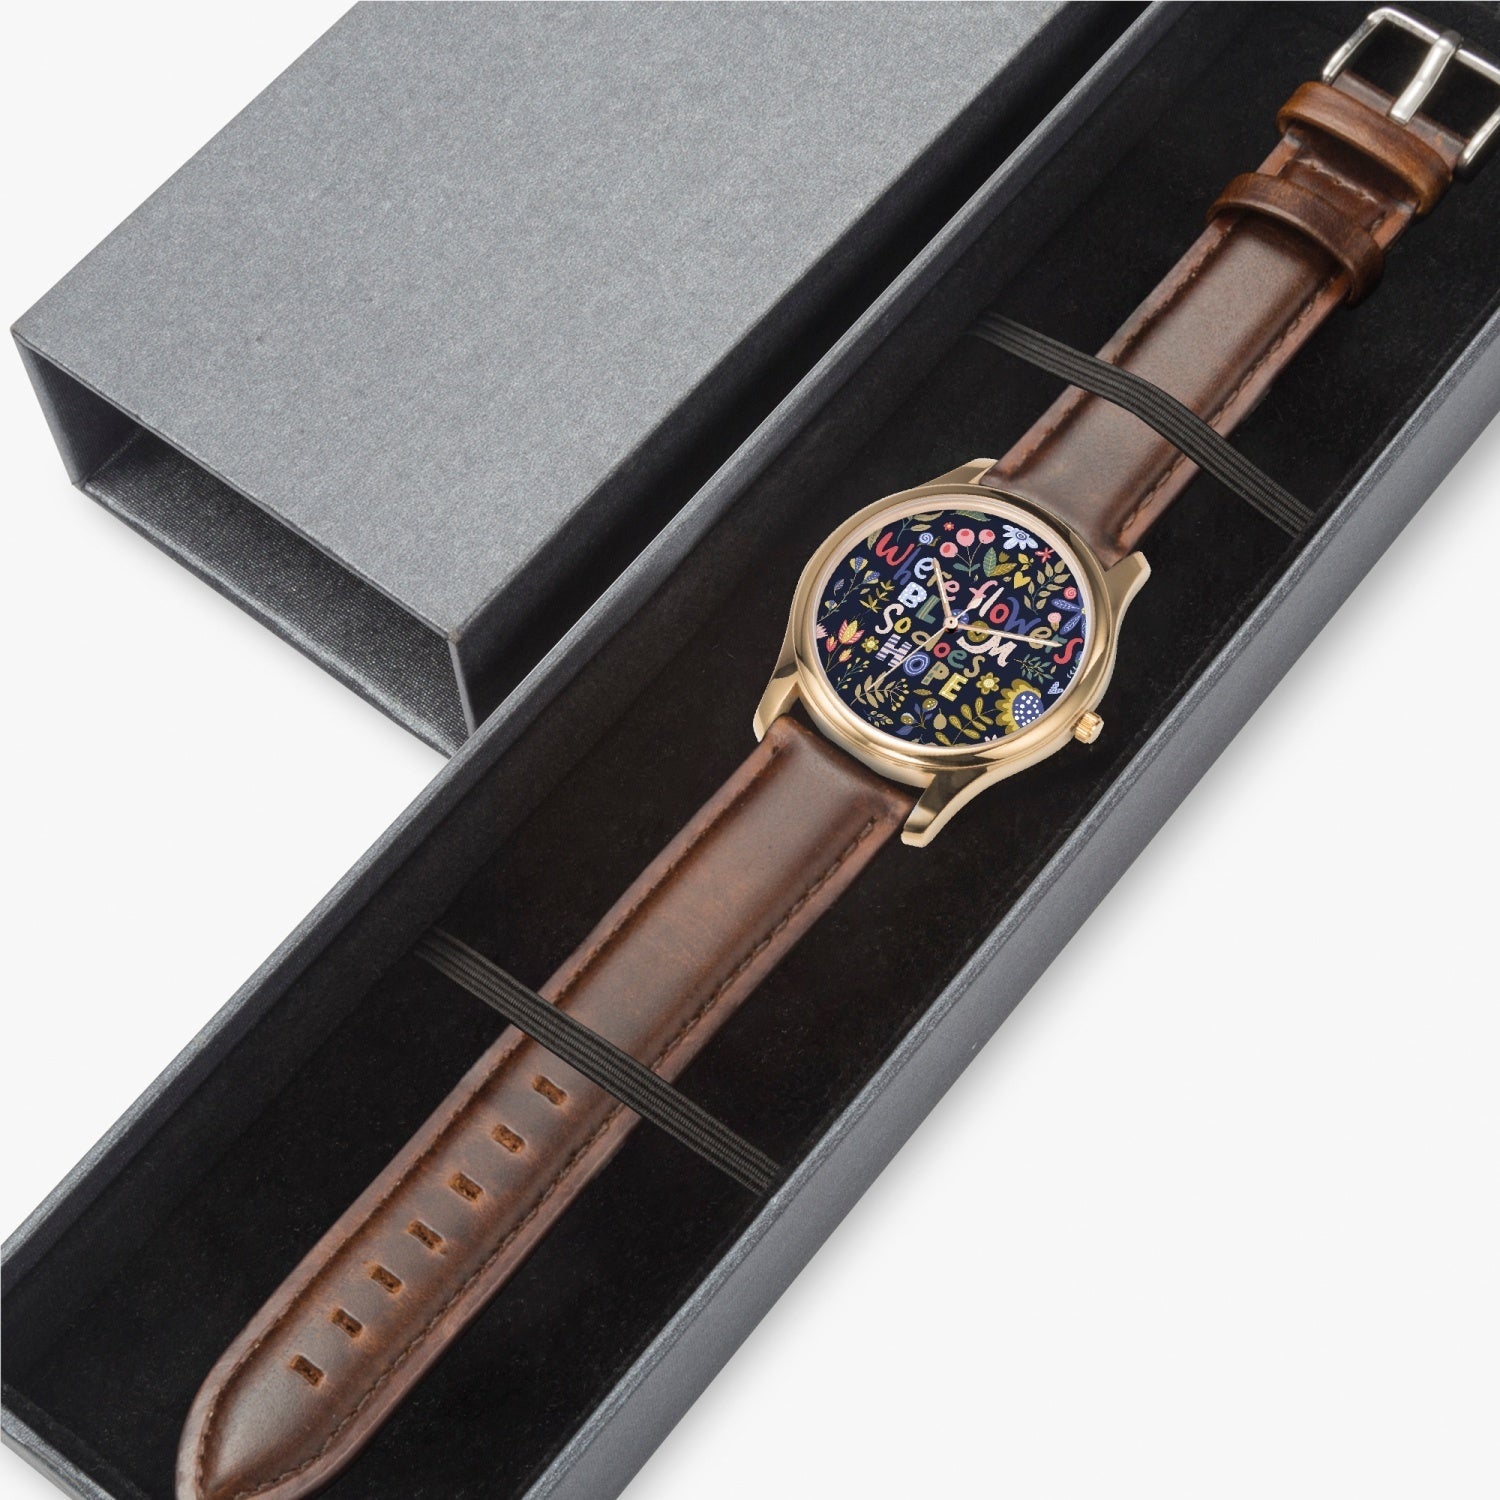 Hope Blooms Leather Strap Classic Quartz Watch - The Kindness Cause